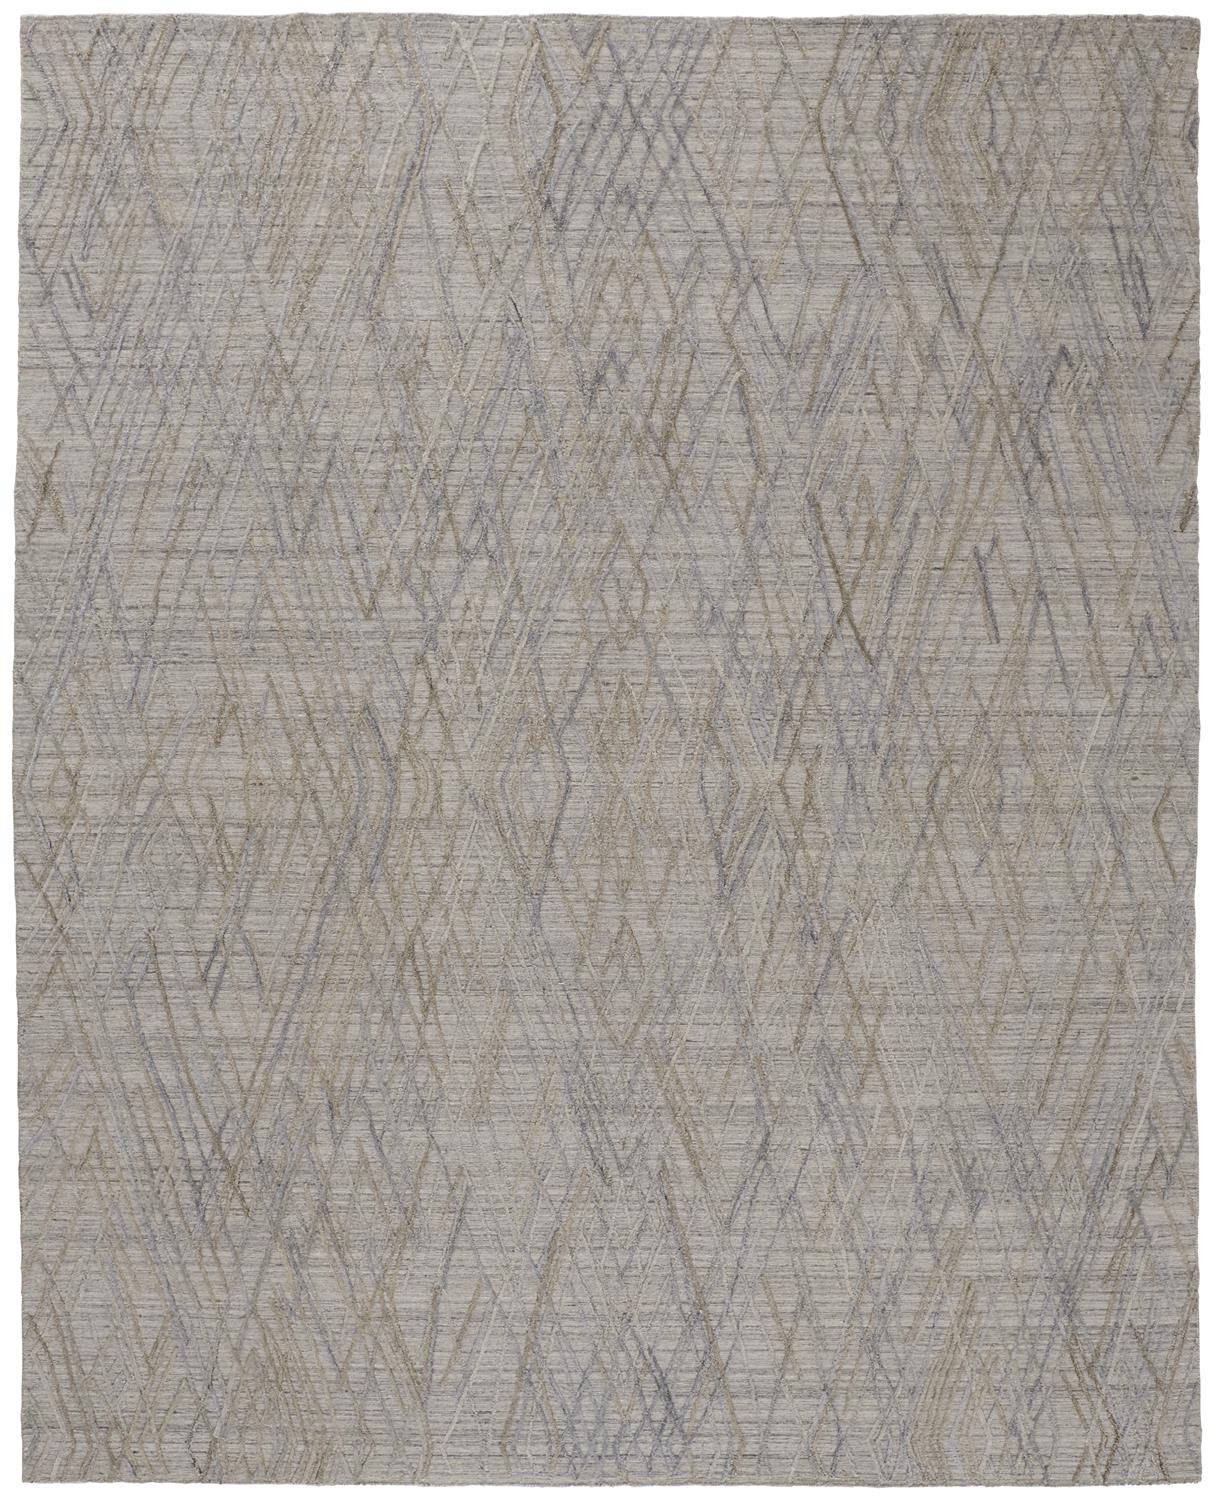 8' X 10' Gray And Blue Abstract Hand Woven Area Rug-513546-1